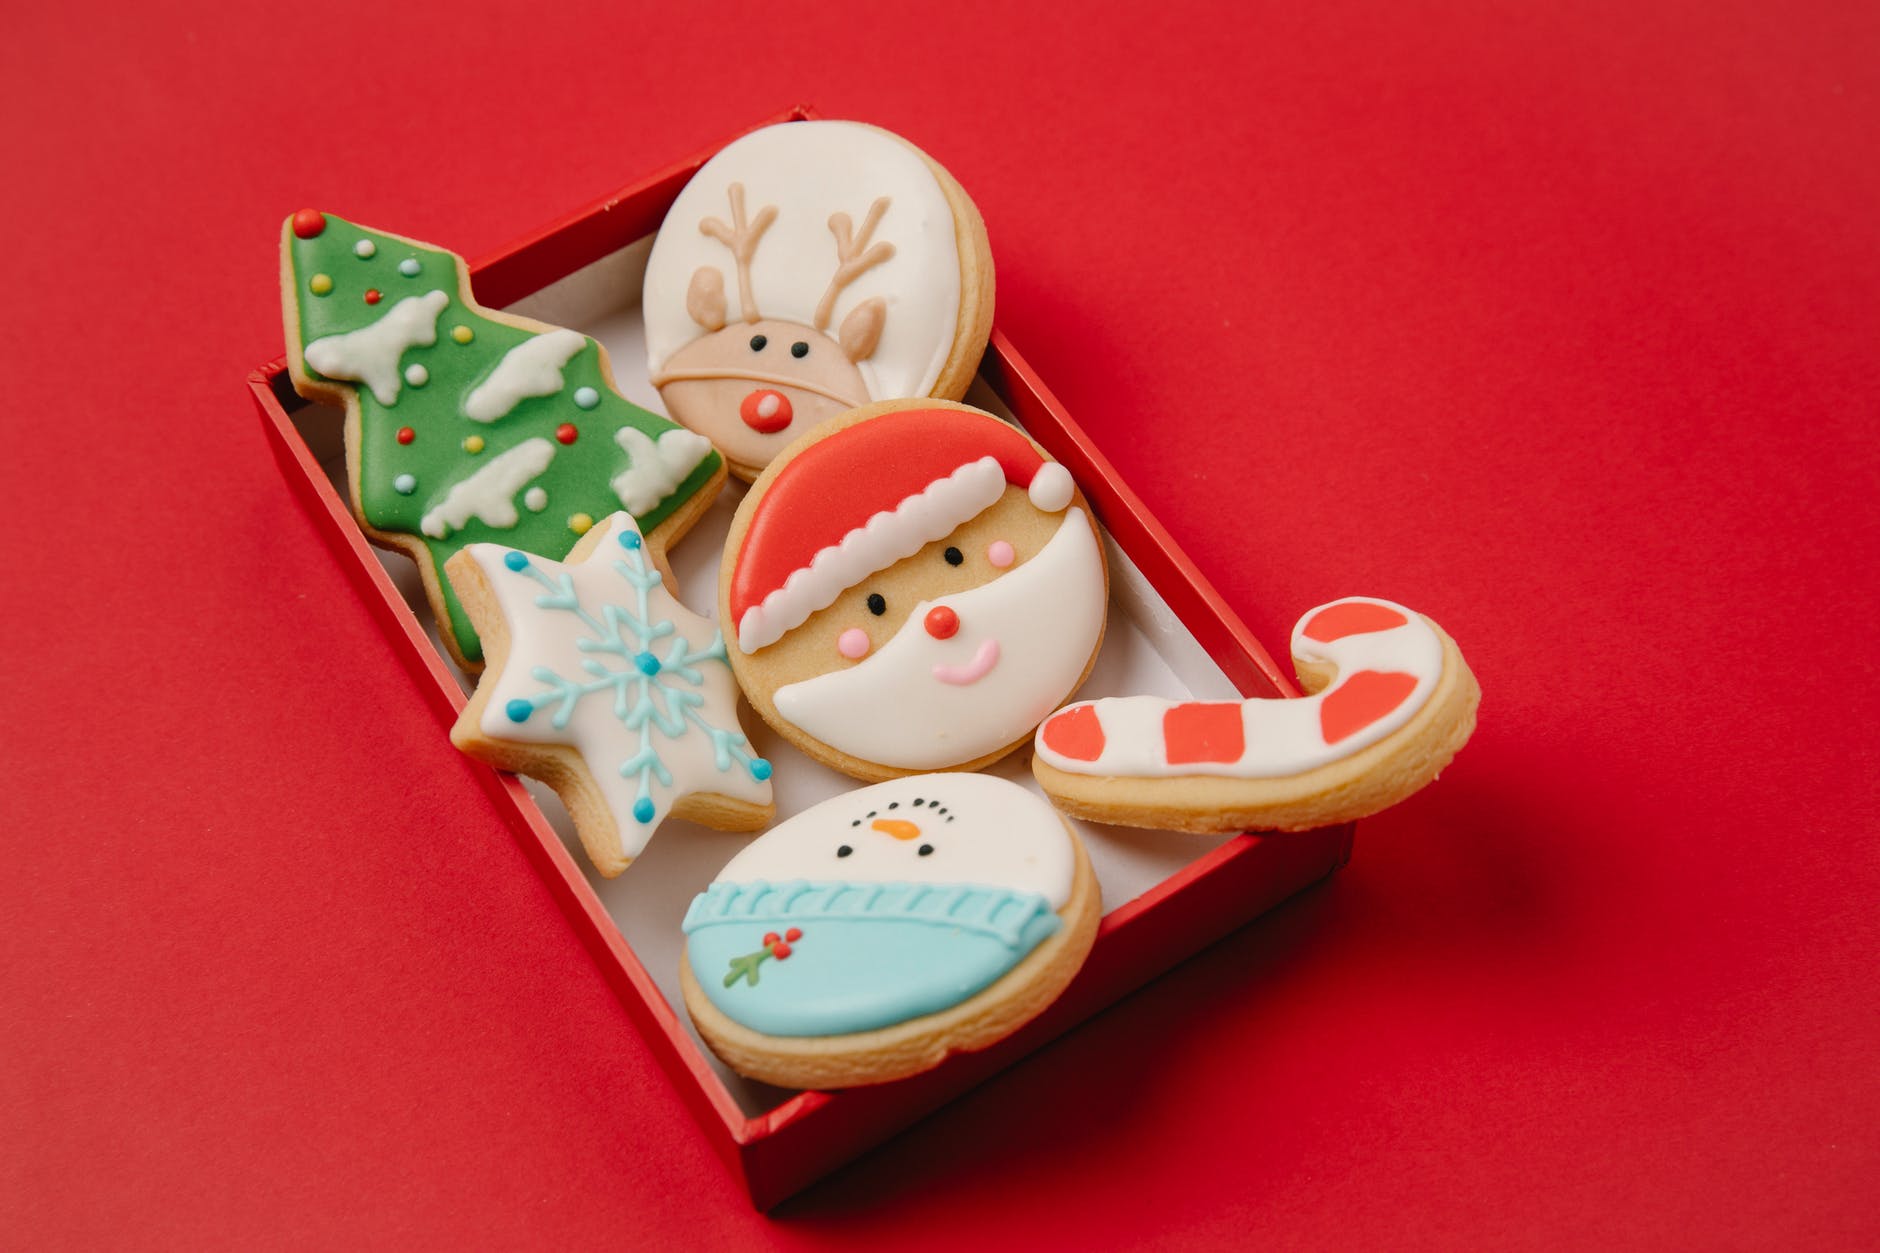 homemade festive cookies in box on table